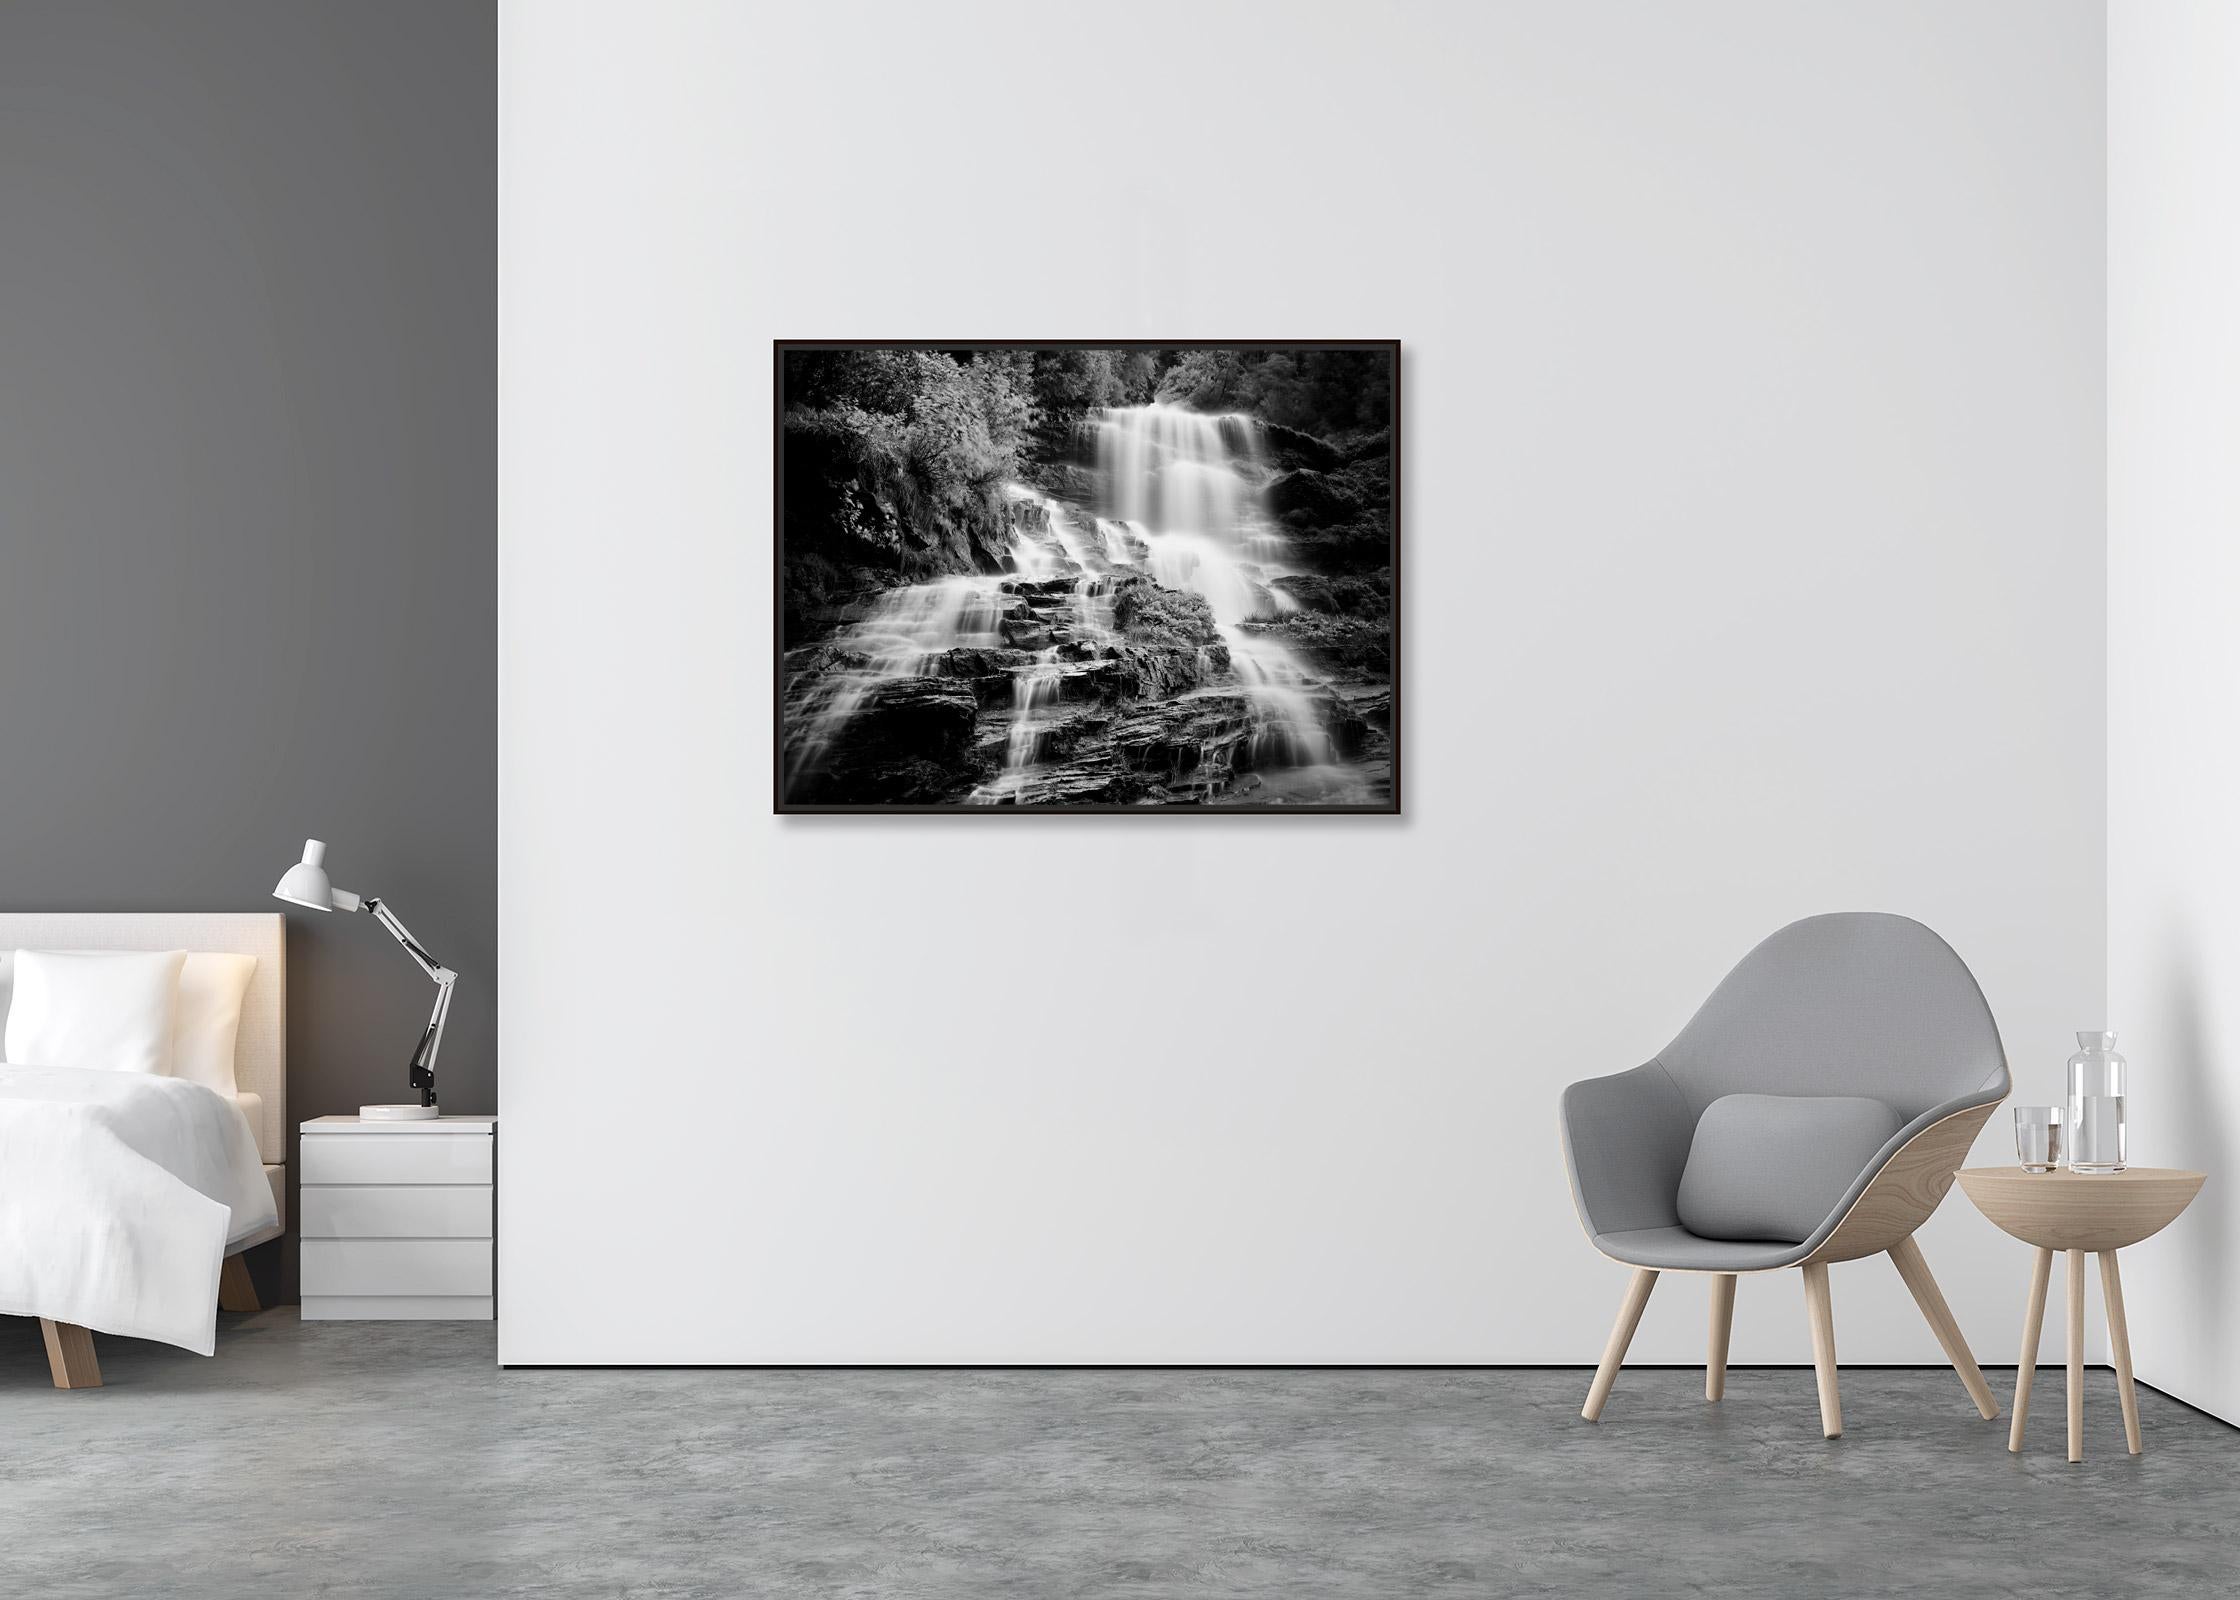 Klockelefall, Waterfall, Mountain stream, black and white photography, landscape - Contemporary Photograph by Gerald Berghammer